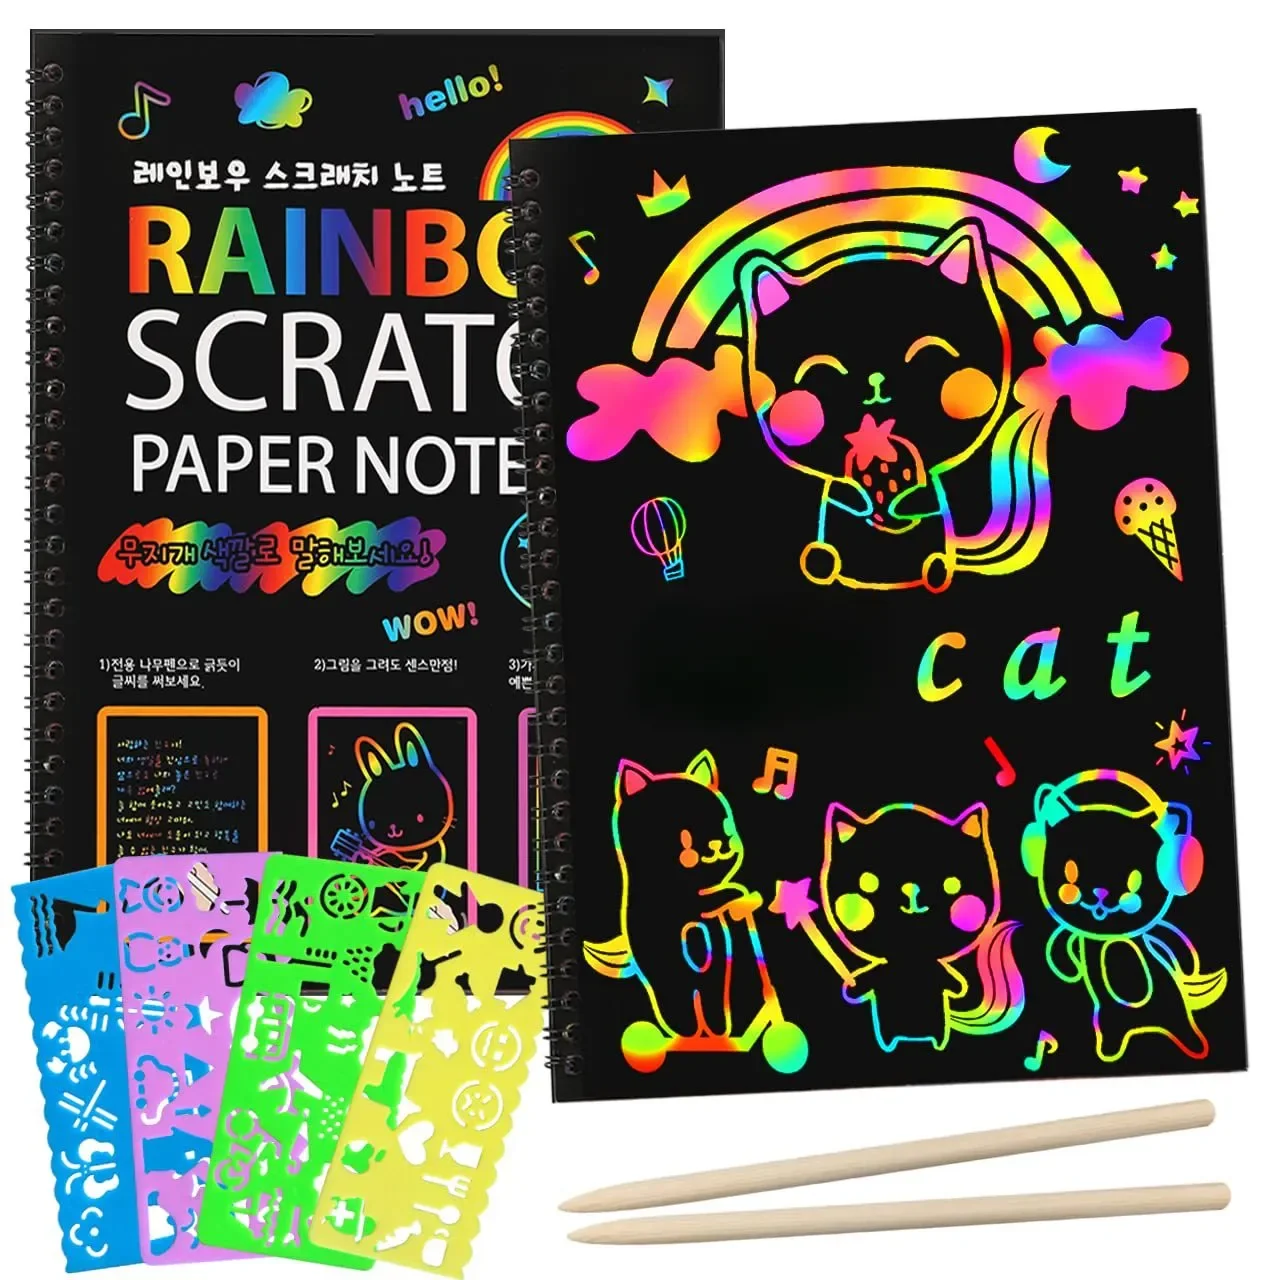 Magic Rainbow Color Scratch Paper Note Books Kids Diy Drawing Toys 26x19cm  Scraping Painting Paper Creative Educational Toys - Drawing Toys -  AliExpress